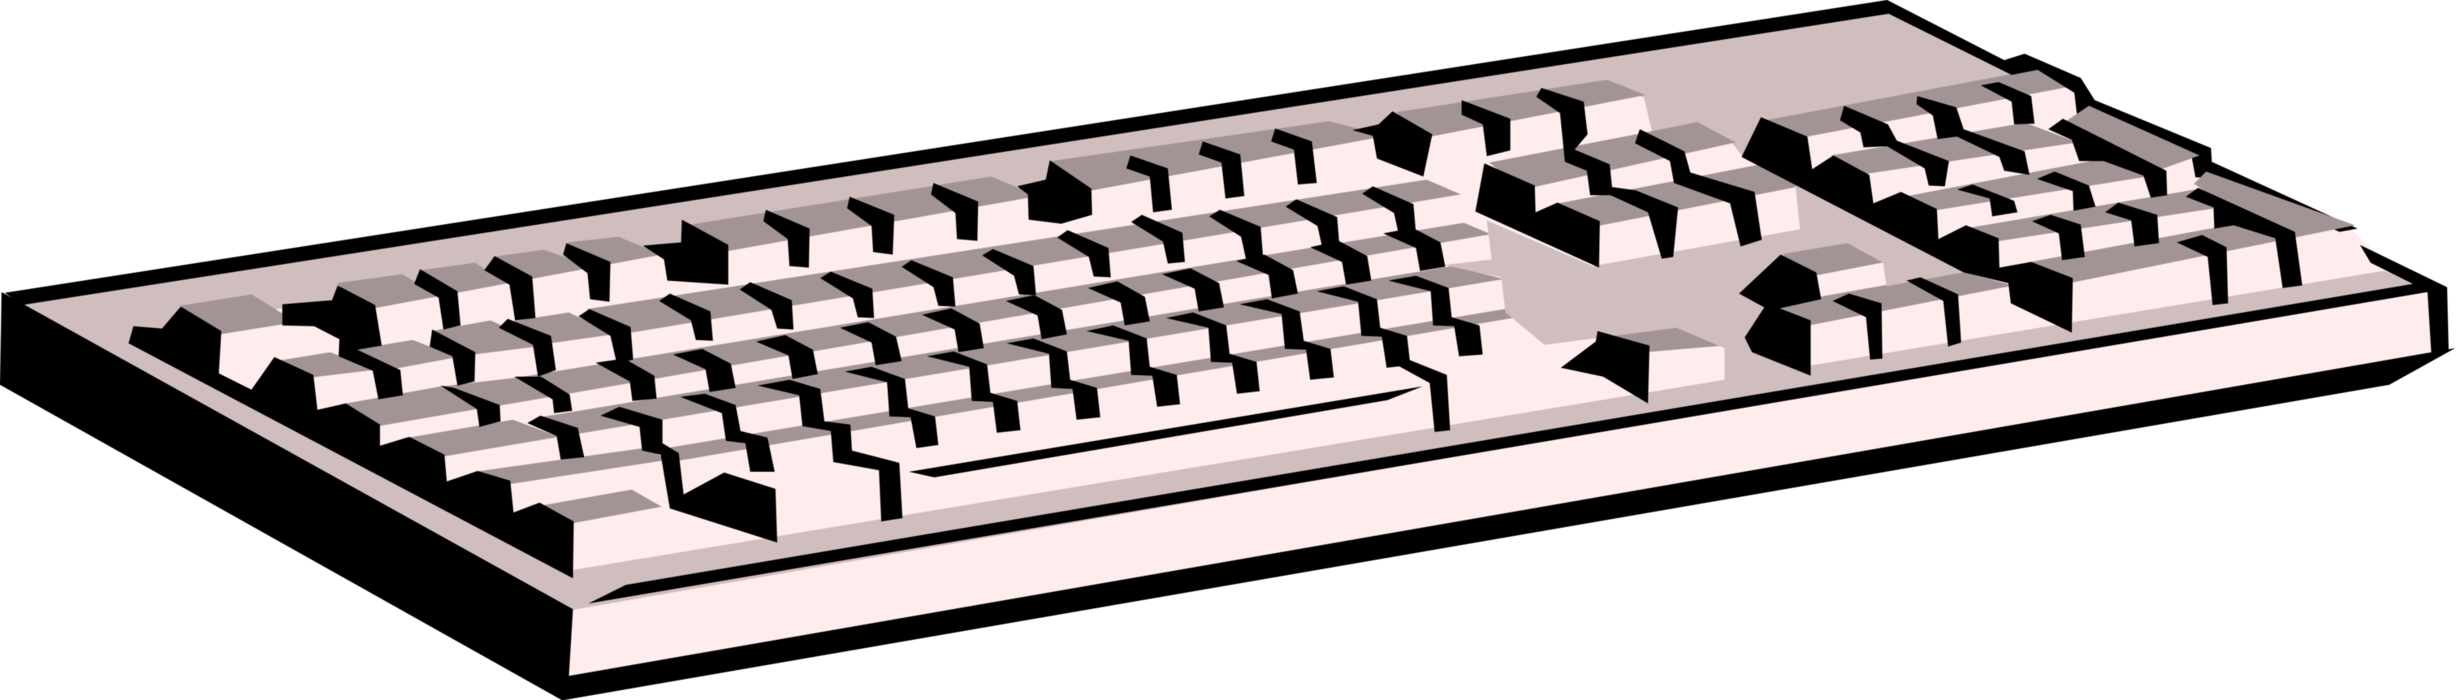 Vector Illustration of Computer Keyboard Typewriter-Style for Input of Alphanumeric Data